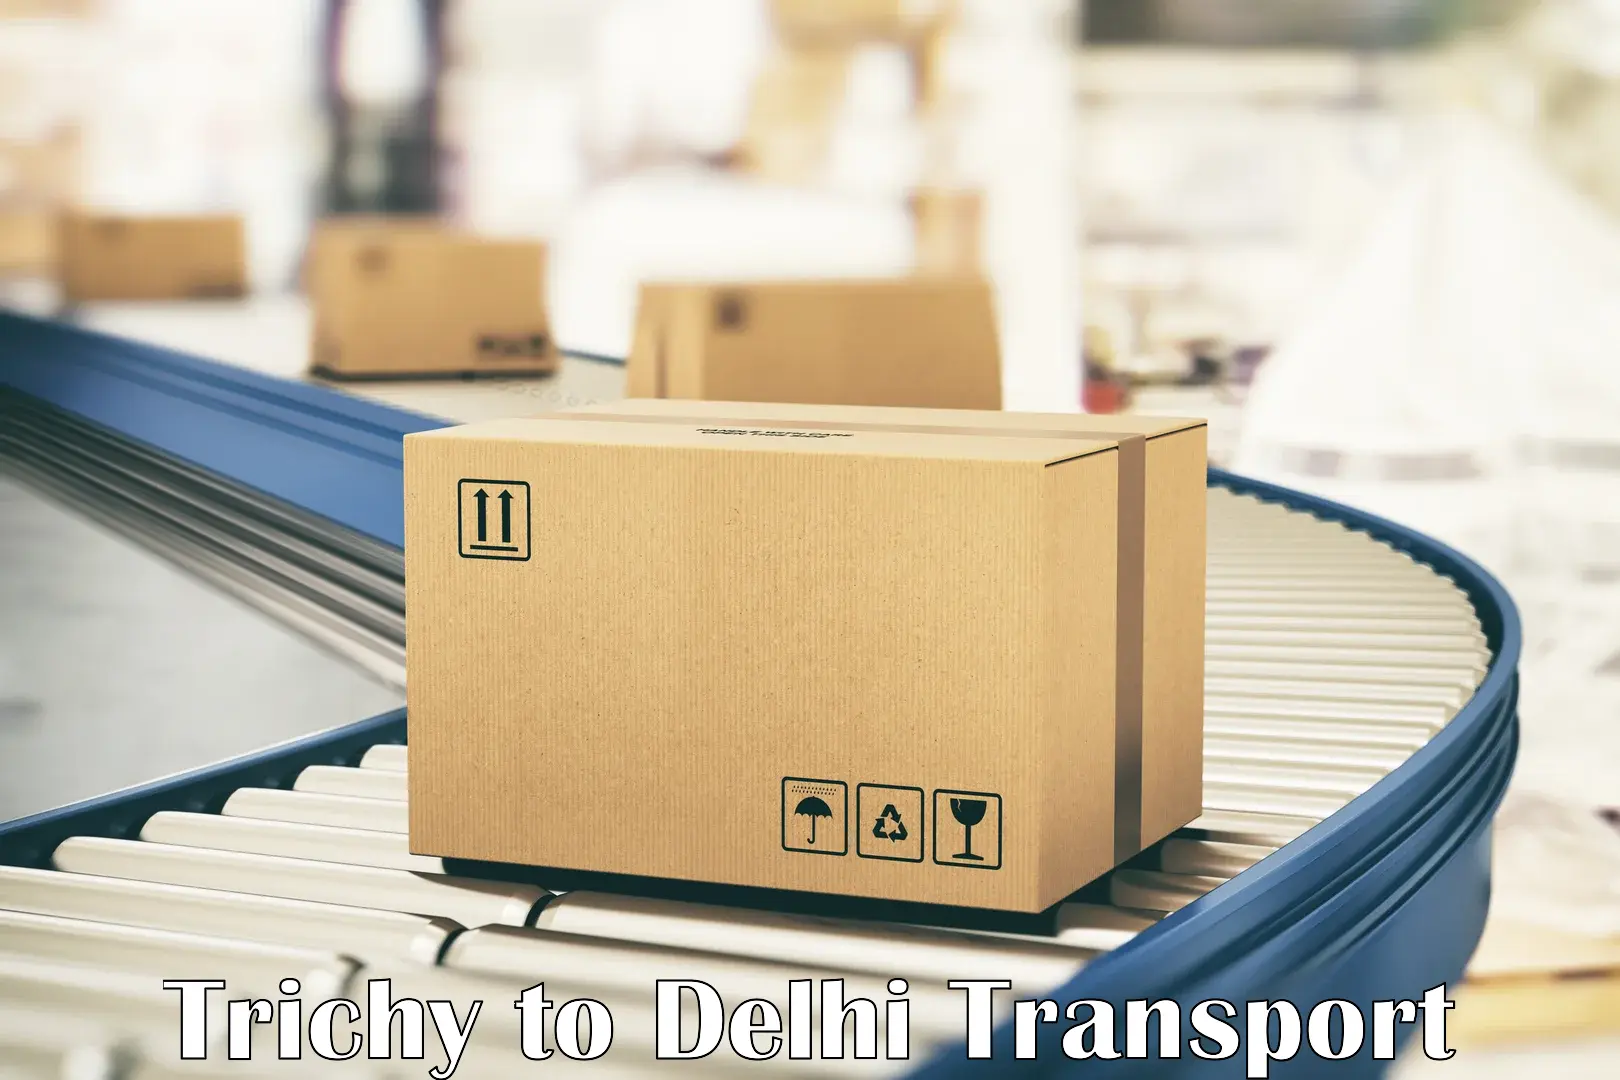 Container transport service Trichy to Delhi